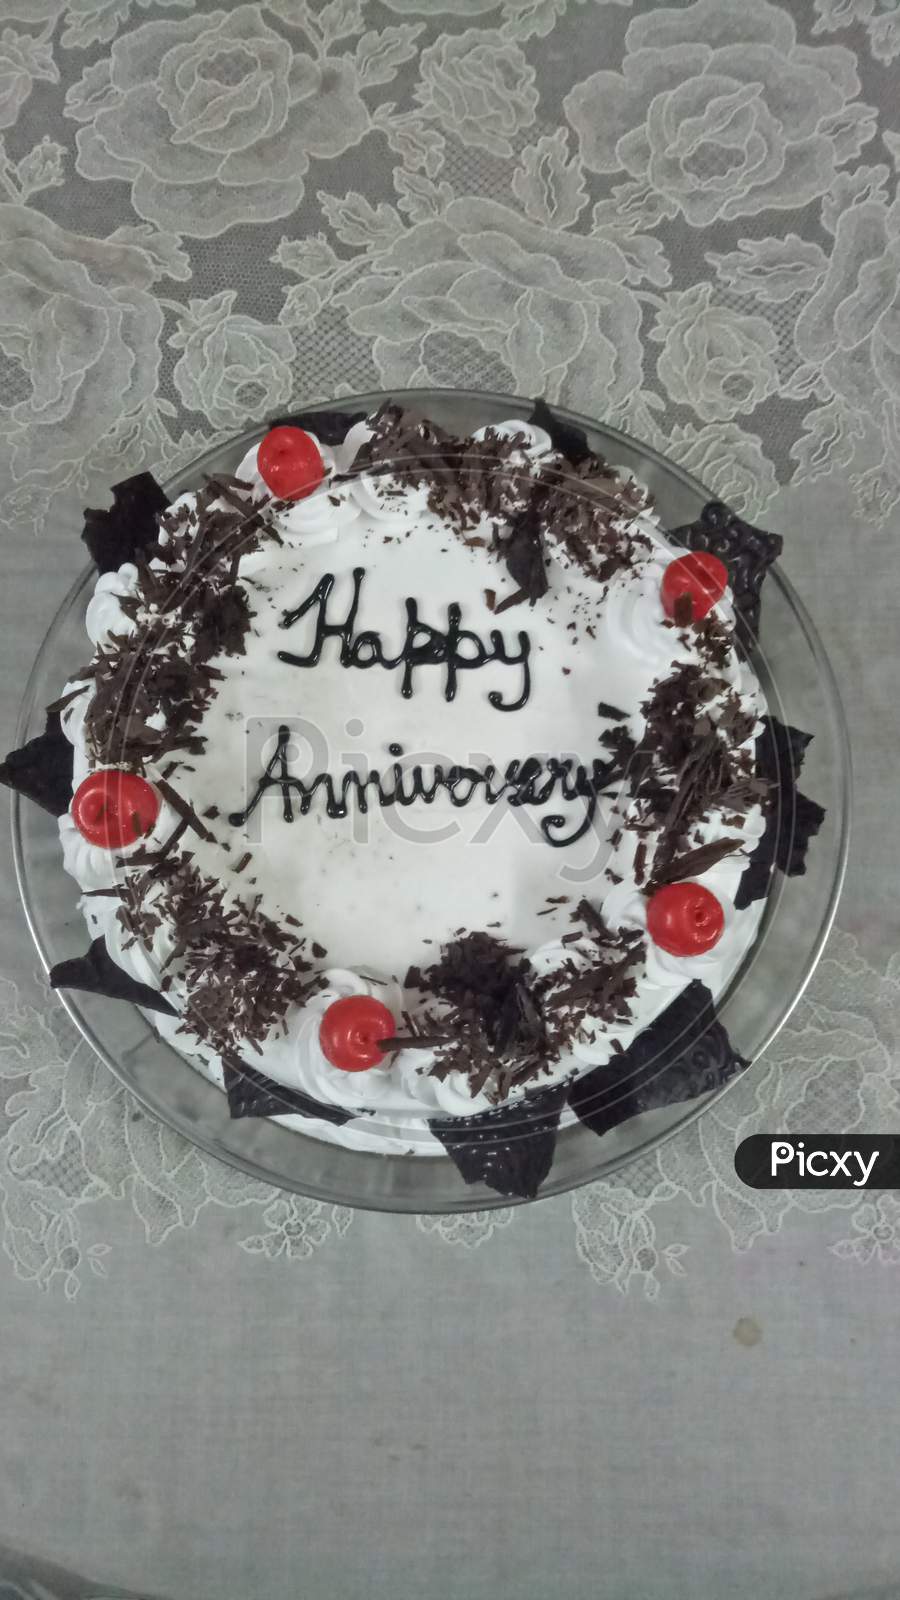 Image of Happy Anniversary cake with cherry toppings-MO837916-Picxy